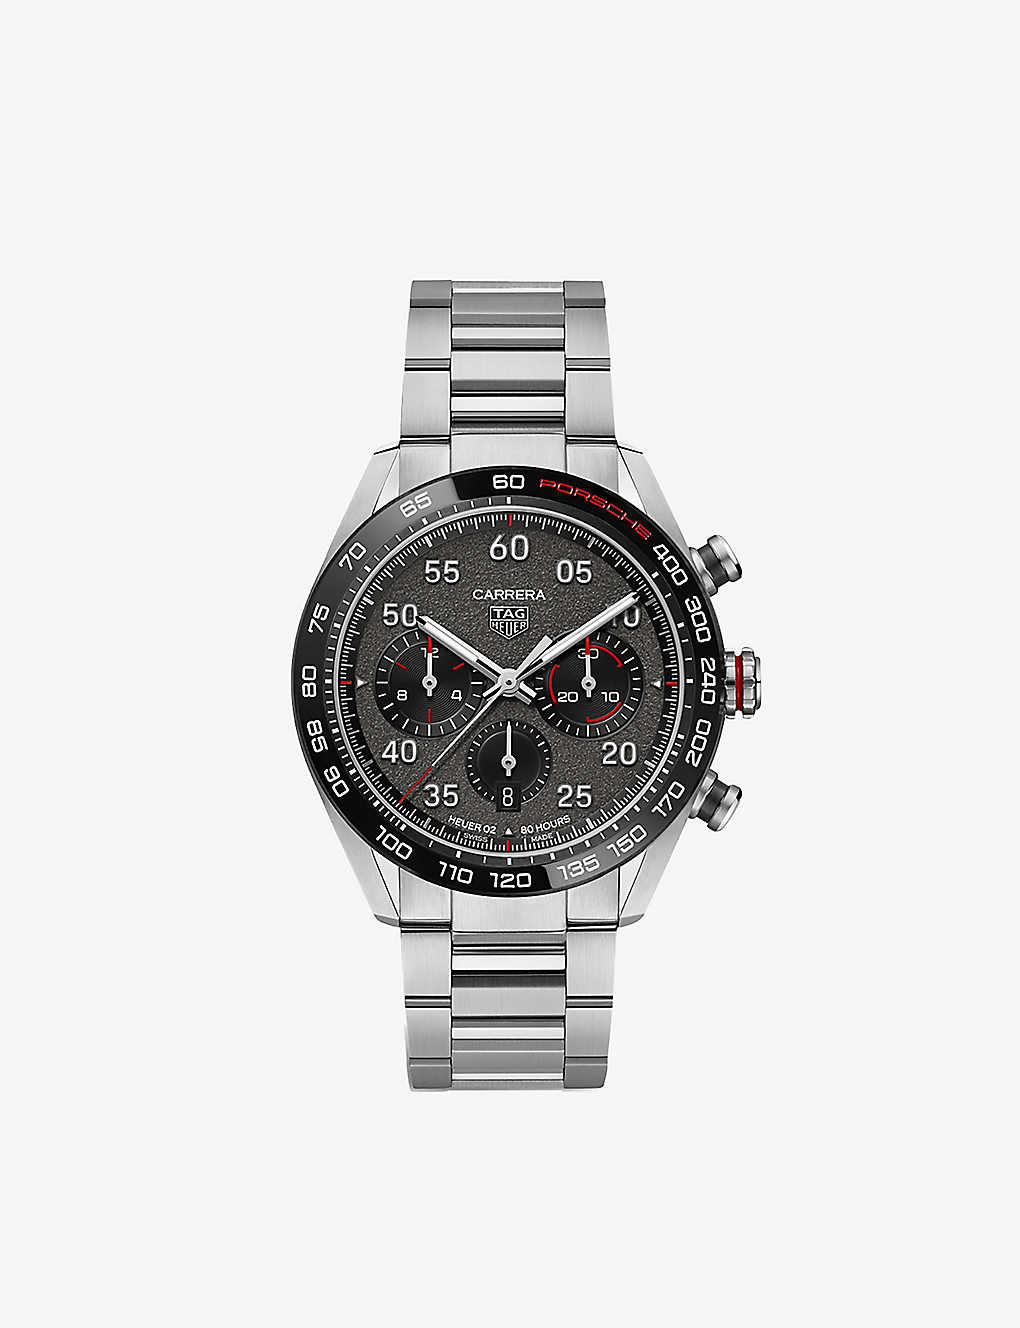 Tag Heuer Cbn2a1f.ba0643 Carrera Porsche Stainless-steel And Ceramic Automatic Watch In Silver